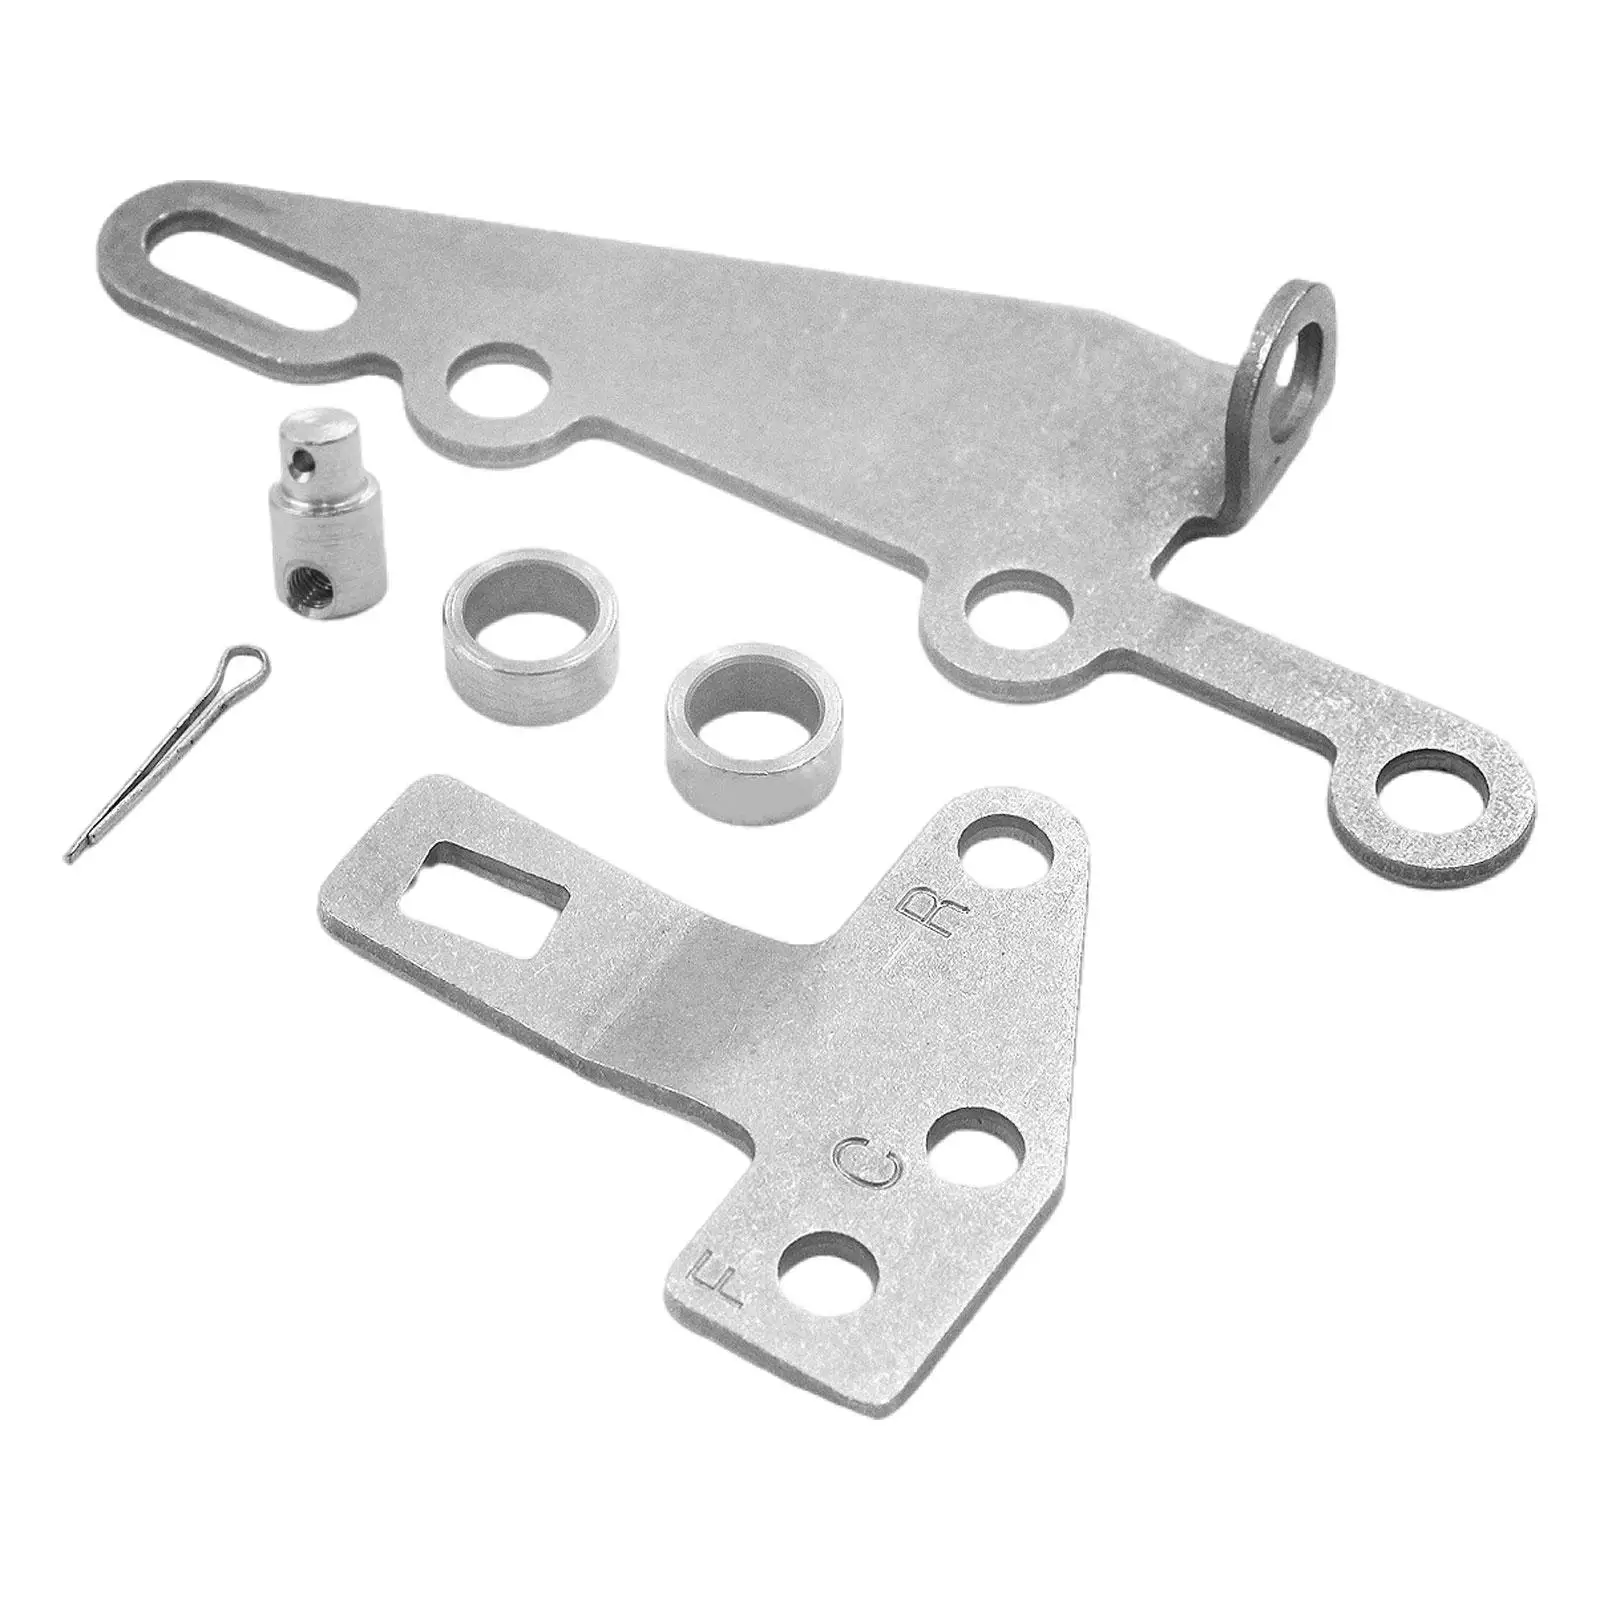 Bracket & Lever Kit Repair Parts 35498 for TH400 TH350 TH700-r4 TH200-4R H250/200 Professional